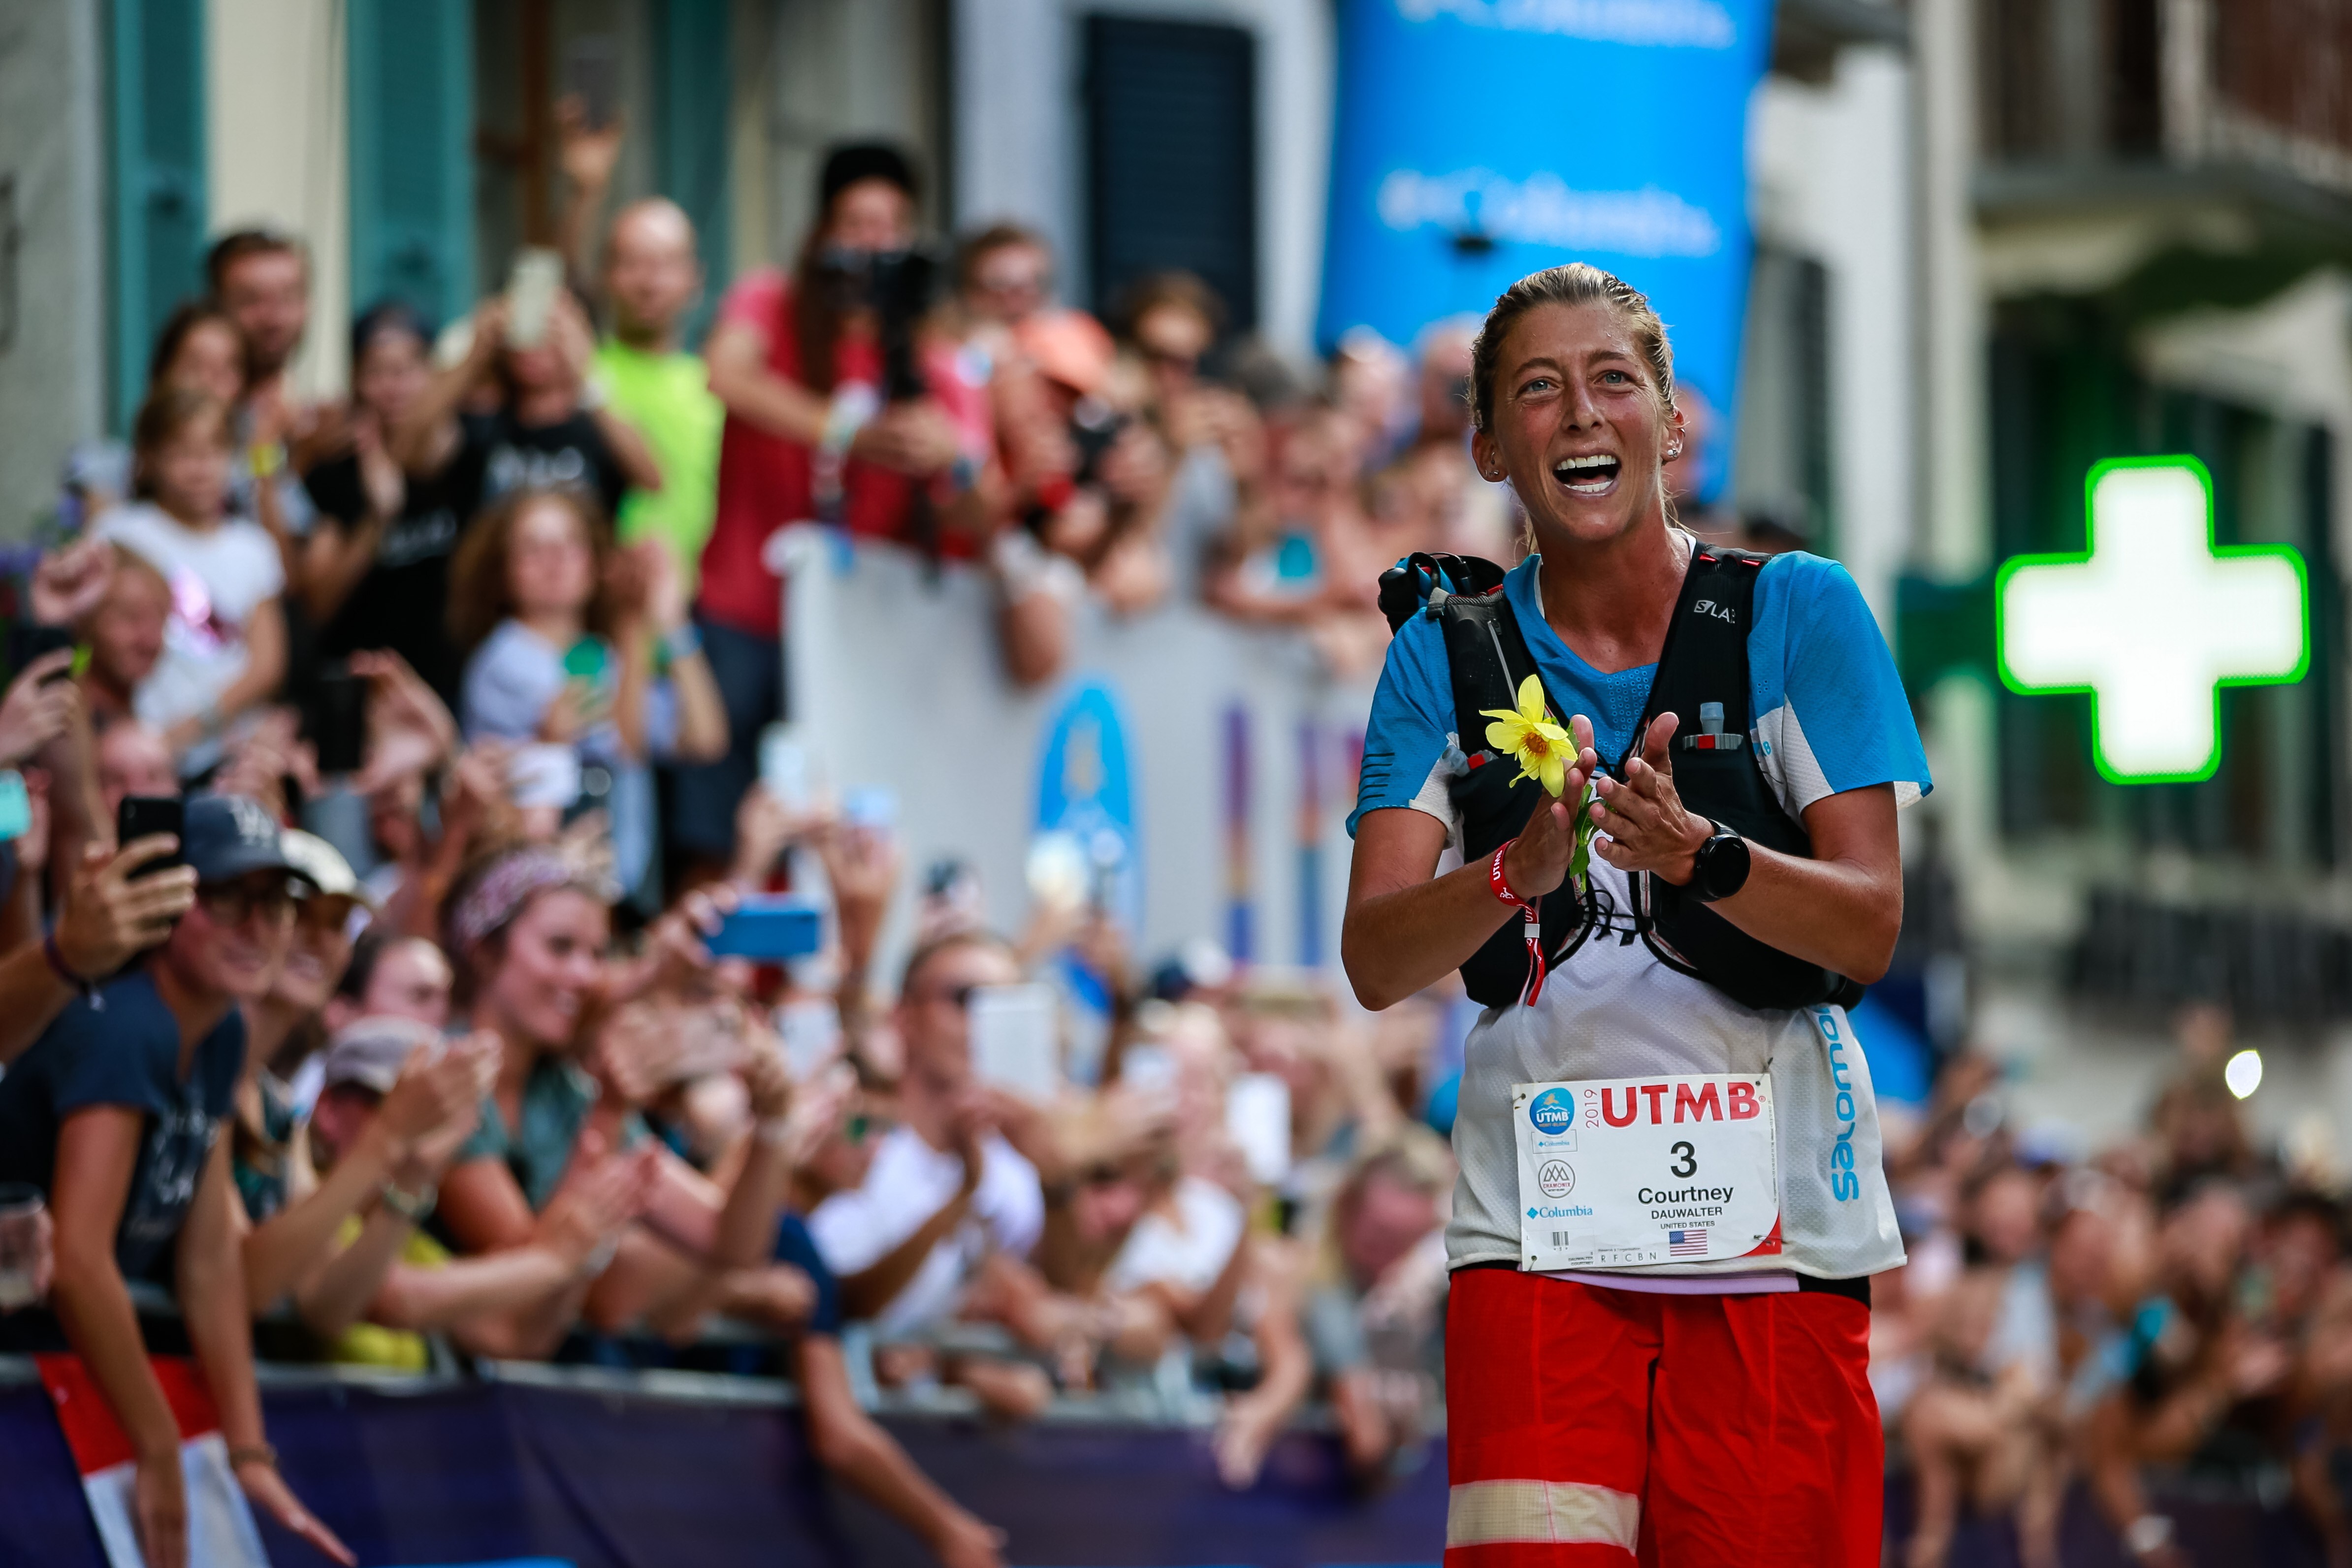 Courtney Dauwalter wins the UTMB 2019 – long races, over 161km, are the events that attract her the most. Photo: UTMB/Christophe Pallot